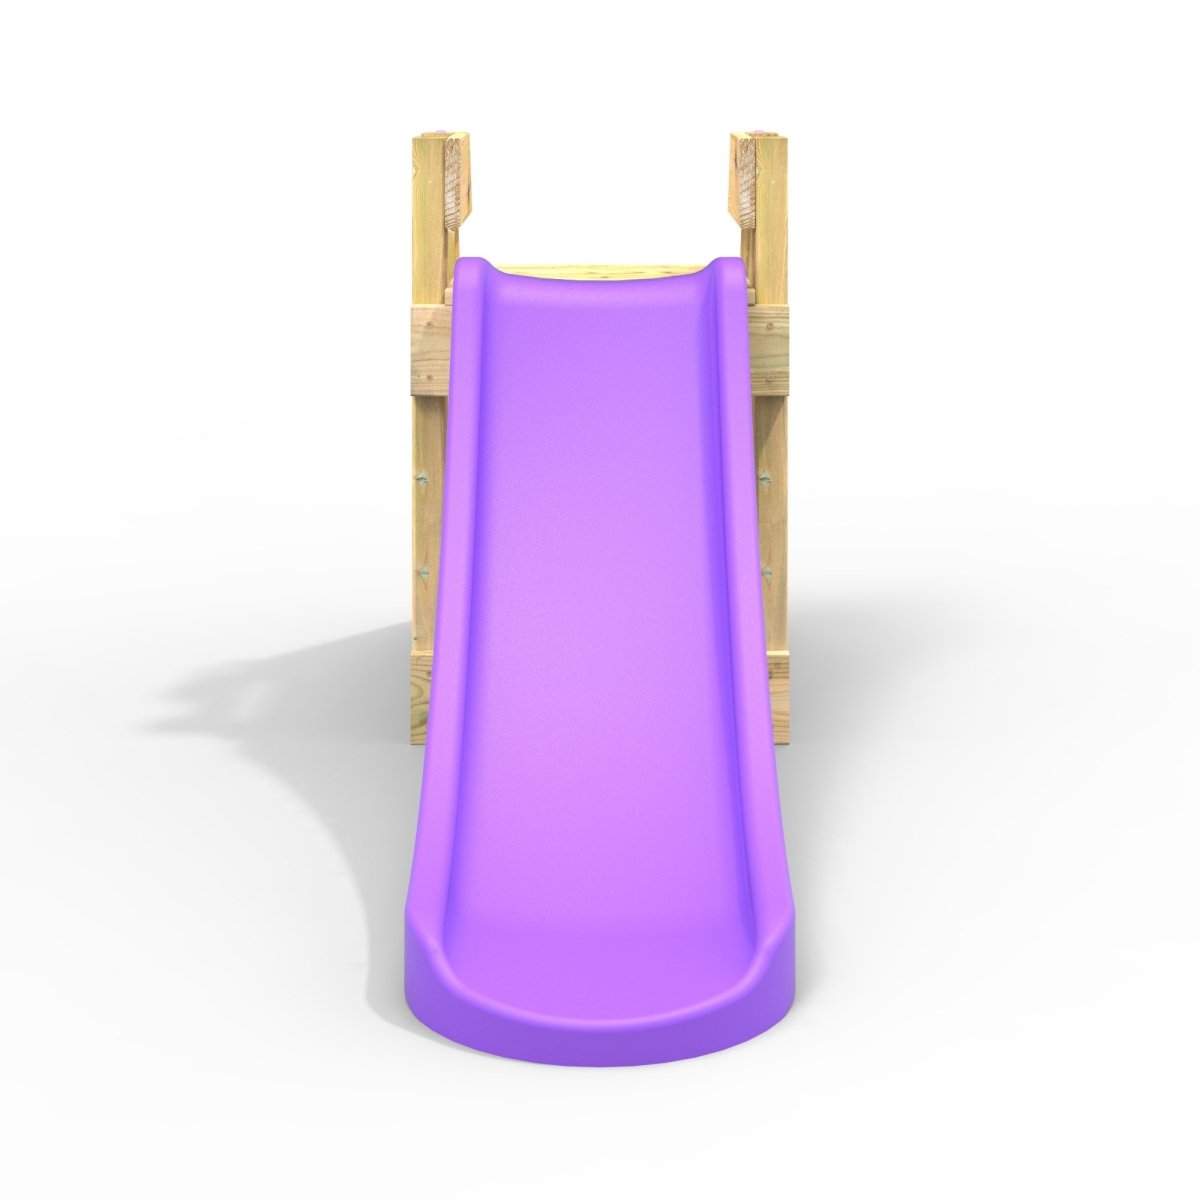 Rebo 4FT Toddler Adventure Slide with Wooden Platform and Climbing Wall - Purple